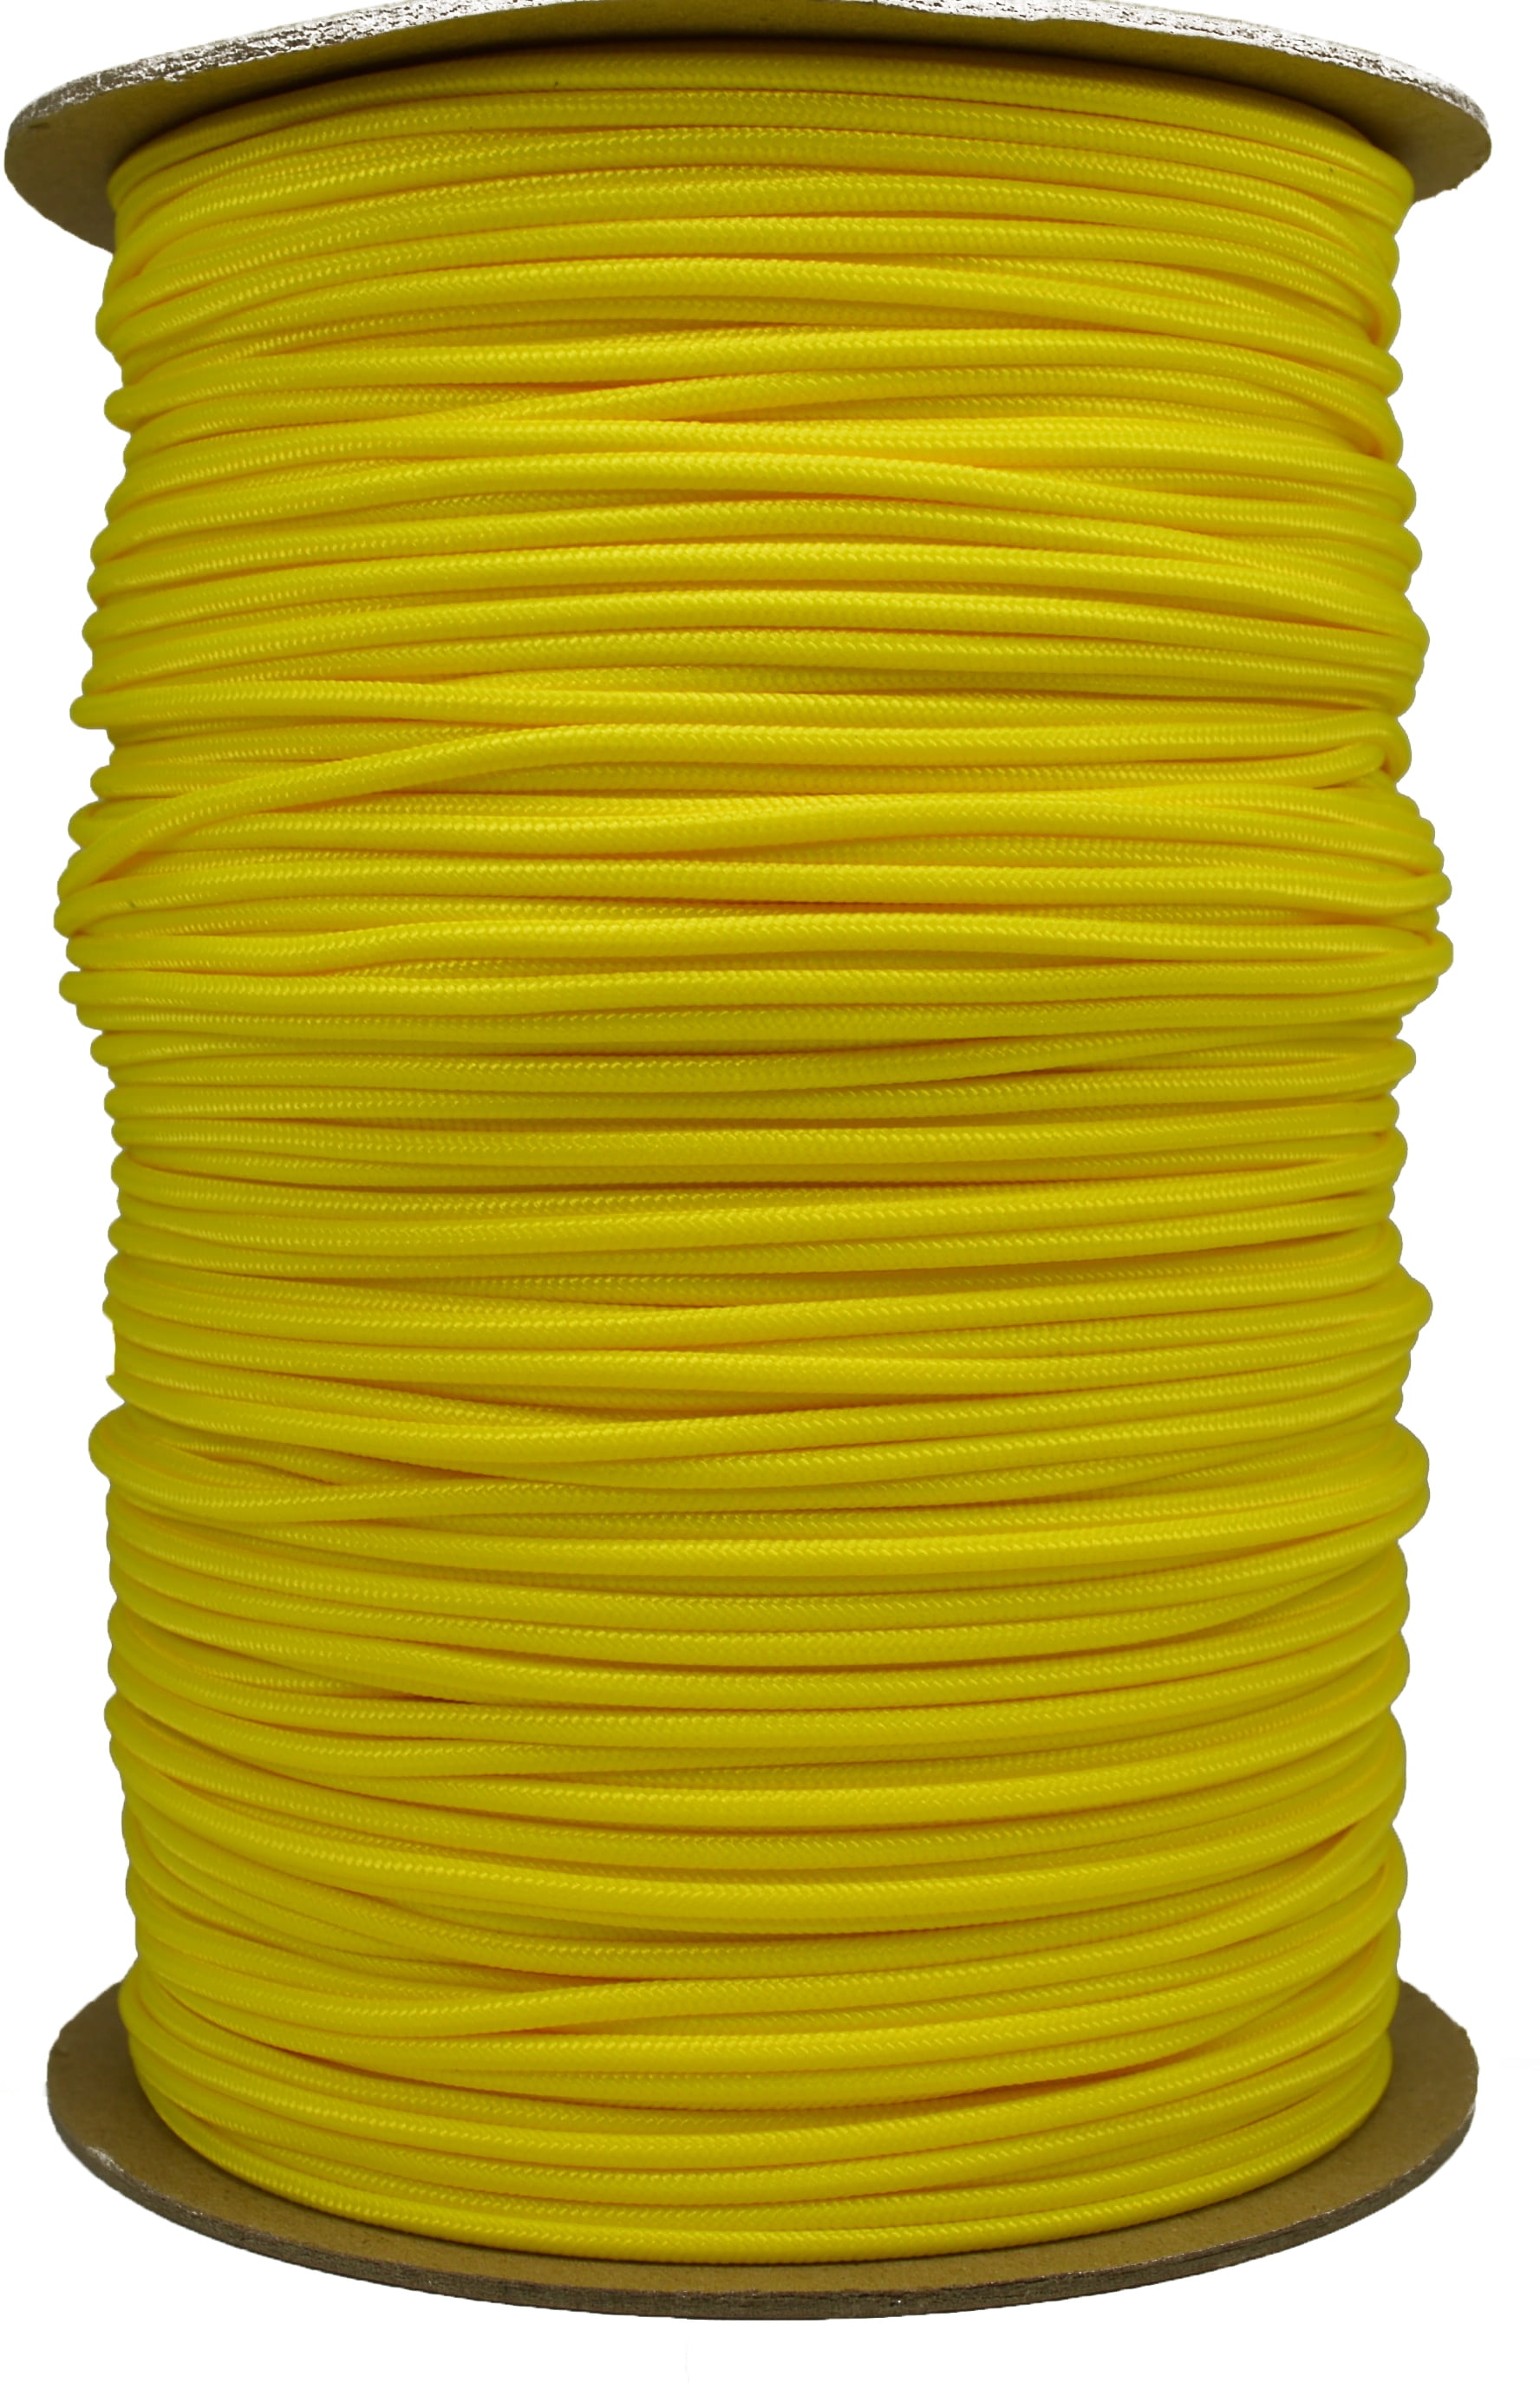 Neon Yellow 275 Cord 5 Strand Paracord - 1000 Foot Spool 